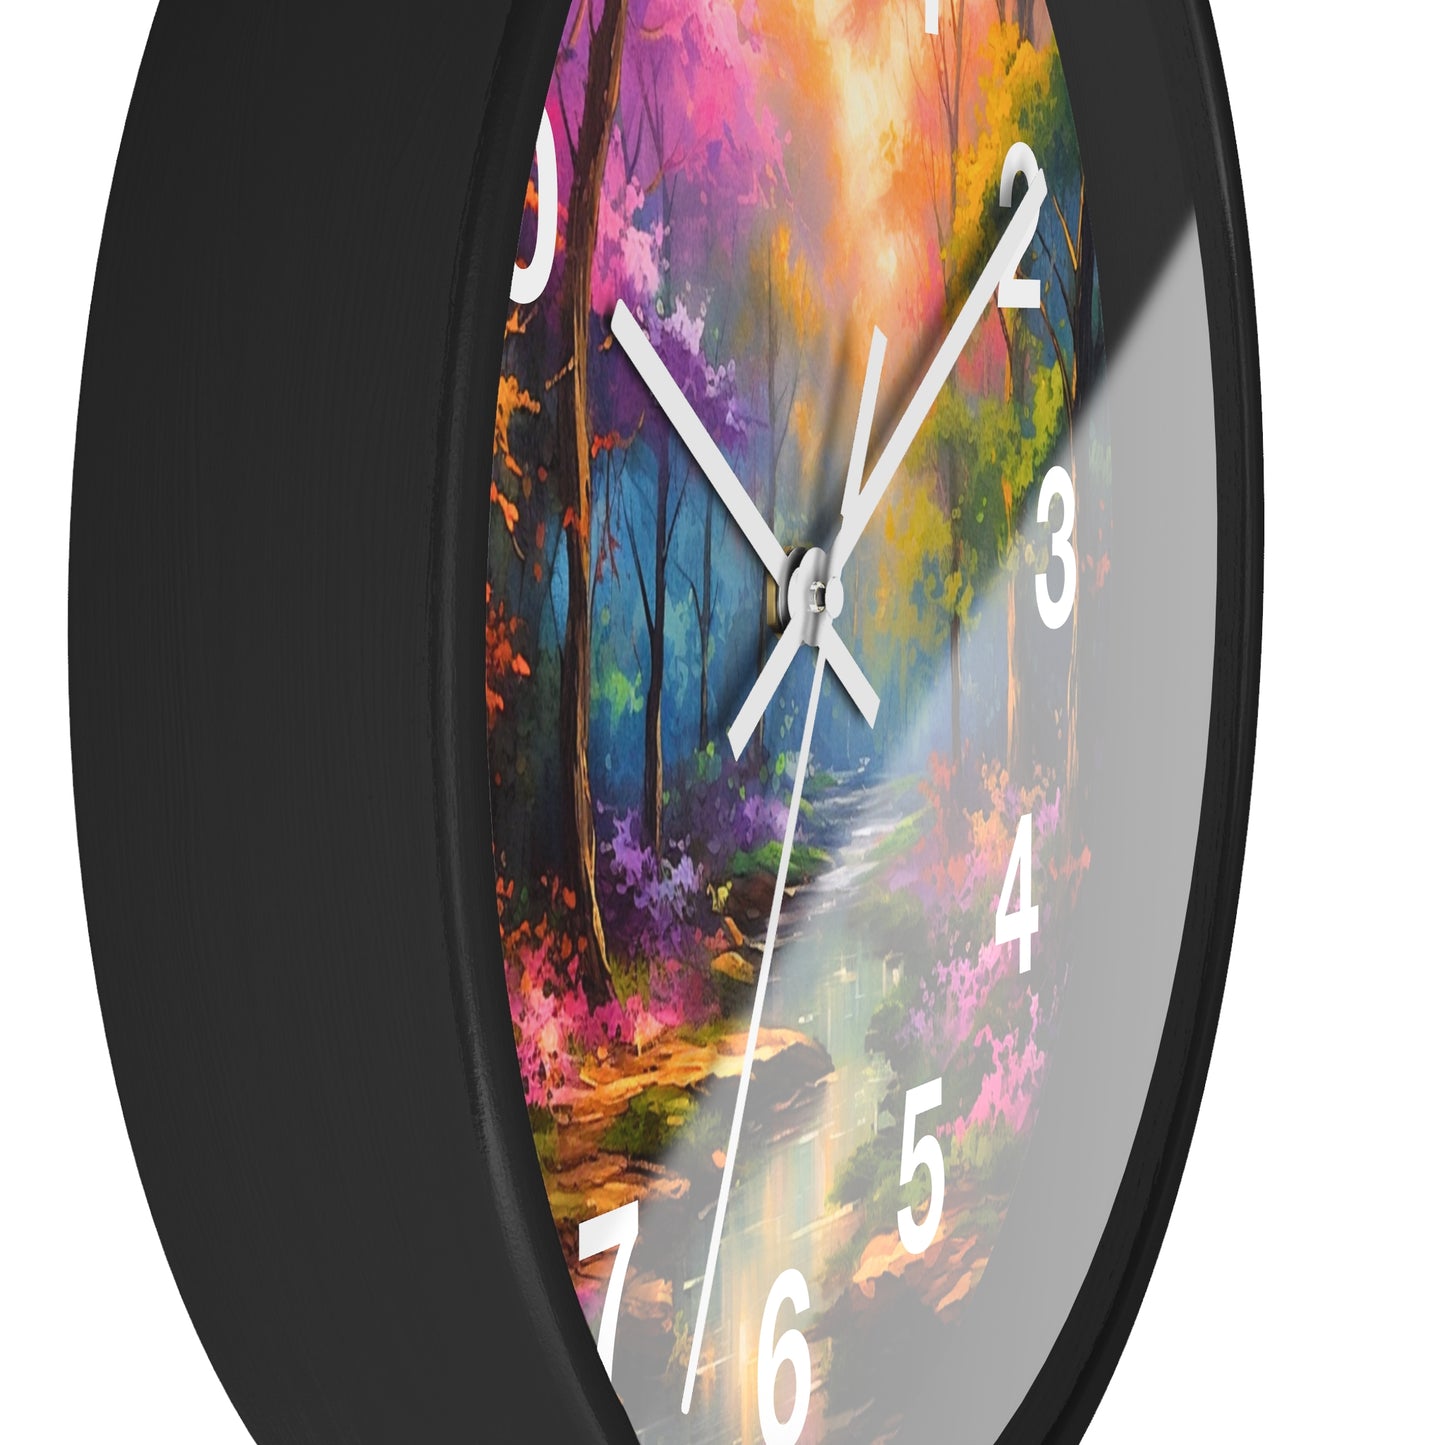 Wall Clock - Enchanted Forest 1